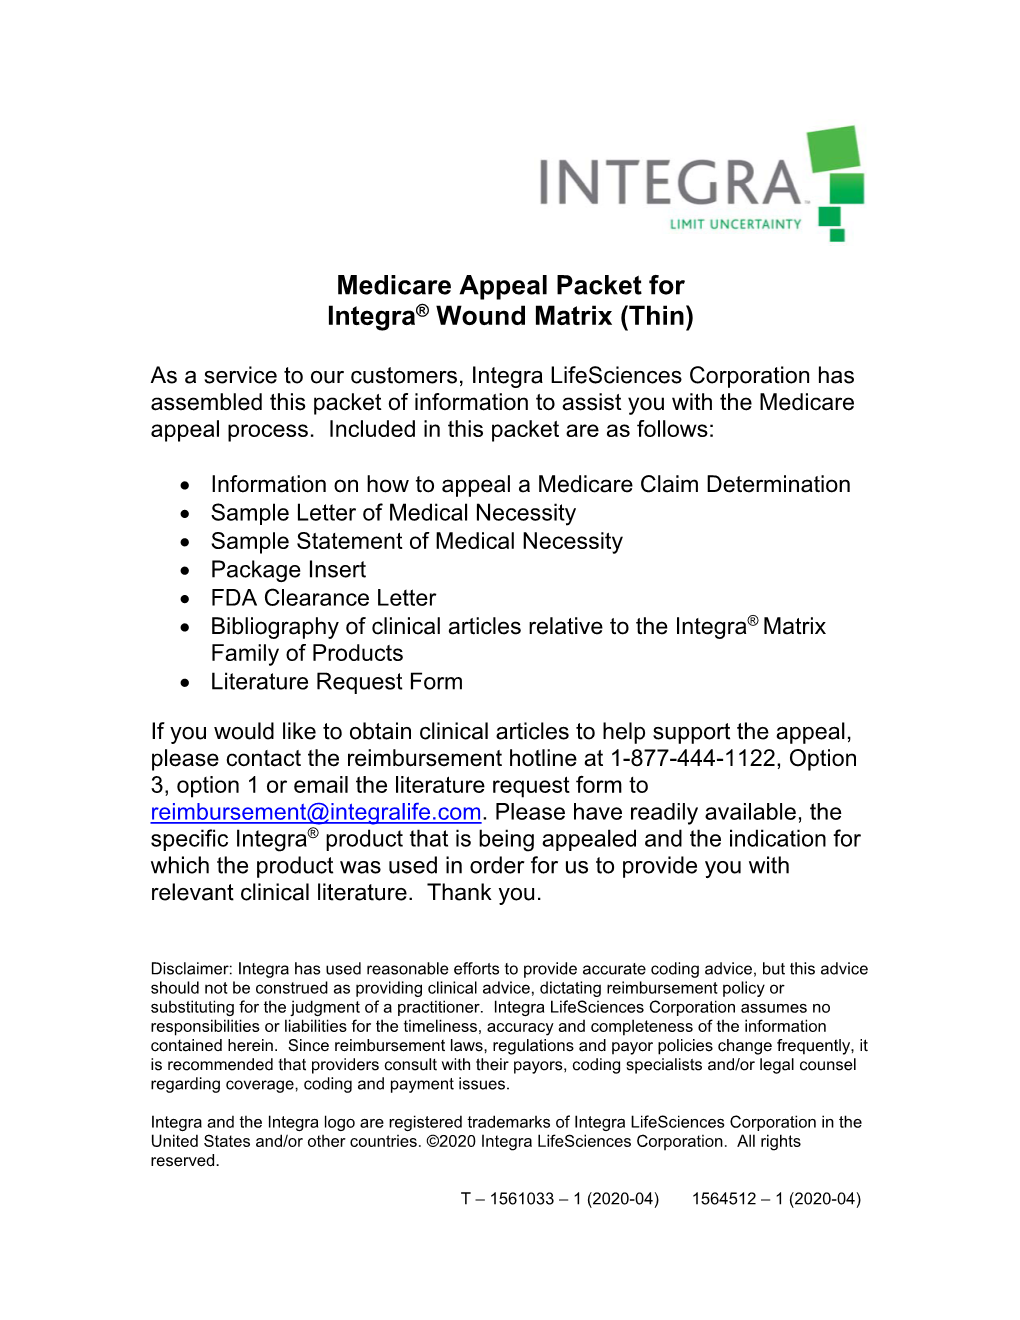 Medicare Appeal Packet for Integra® Wound Matrix (Thin)